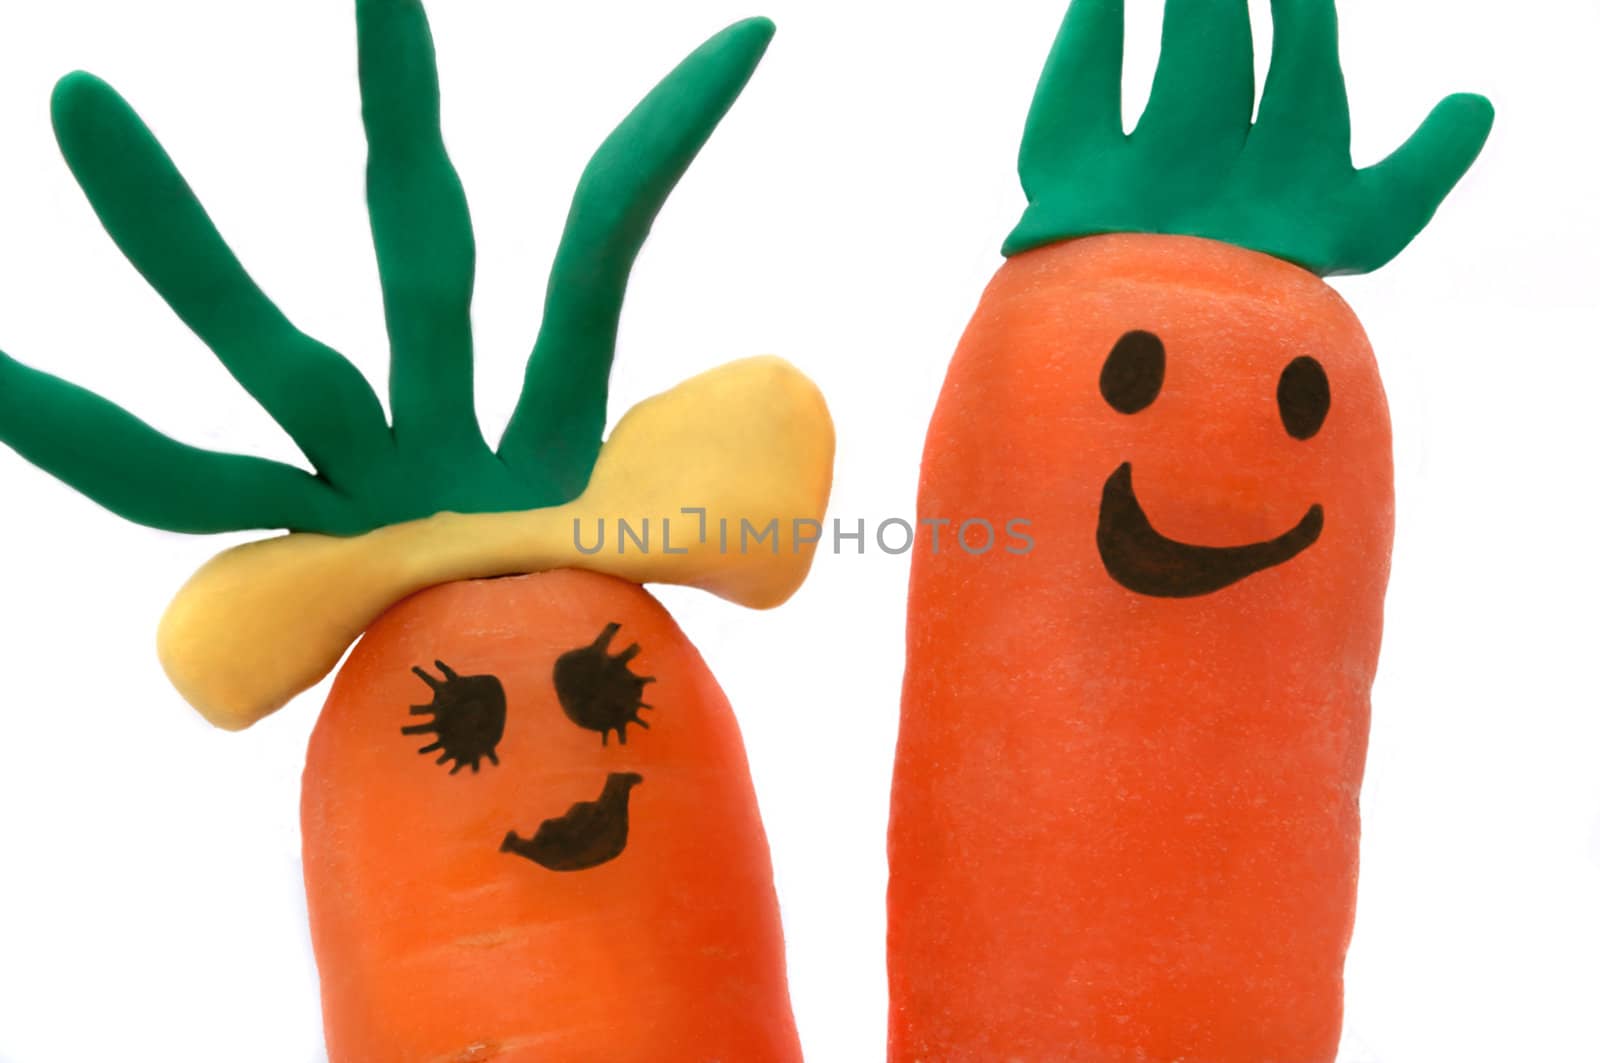 Close up of two carrots with smiling faces against a white background.